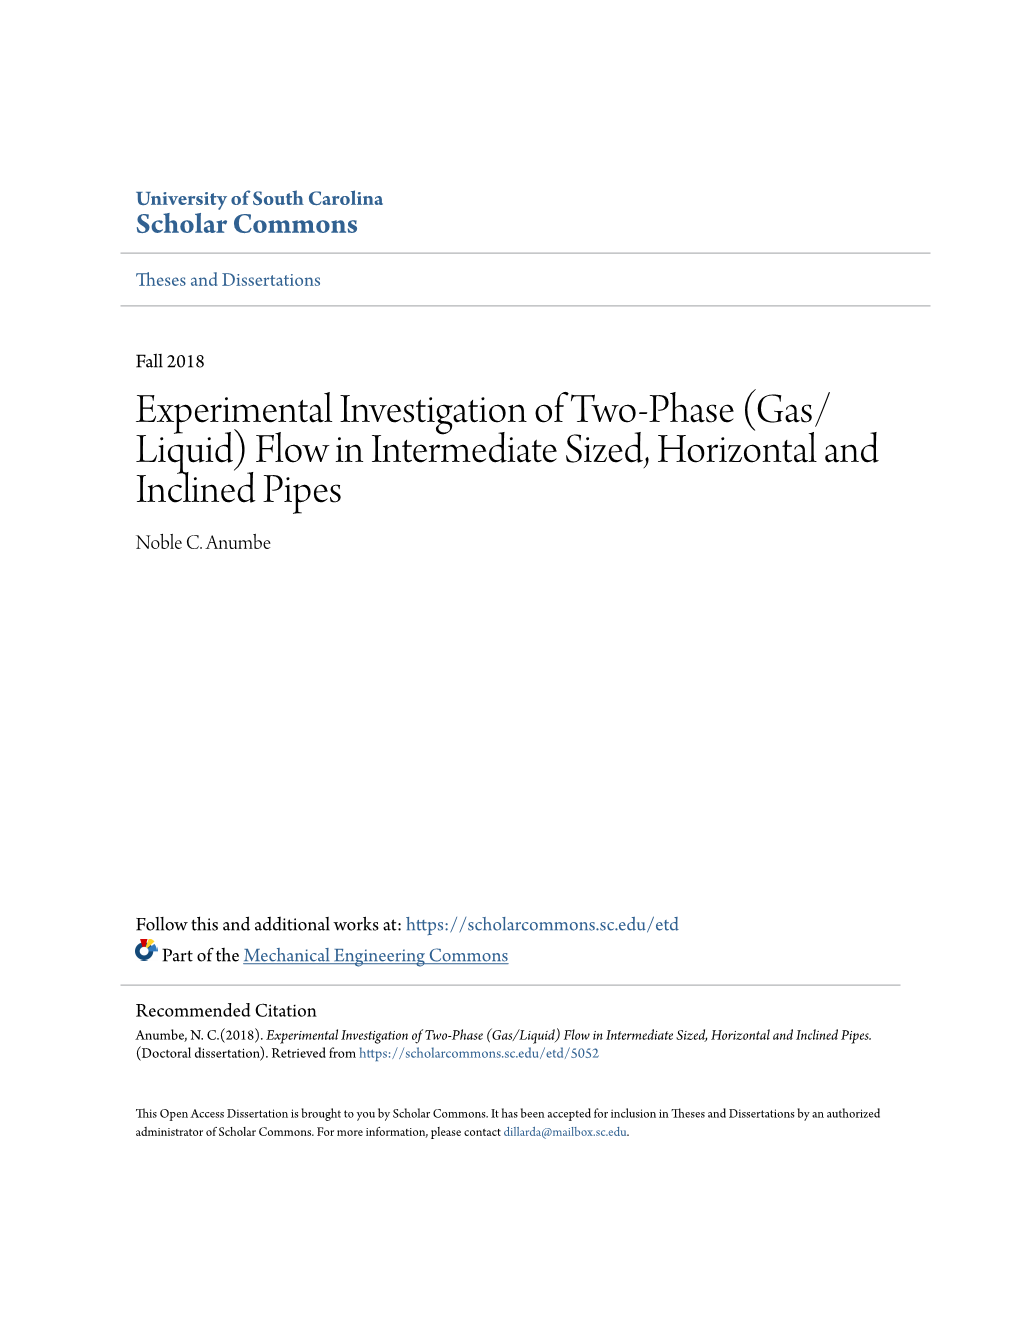 Experimental Investigation of Two-Phase (Gas/Liquid) Flow in Intermediate Sized, Horizontal and Inclined Pipes